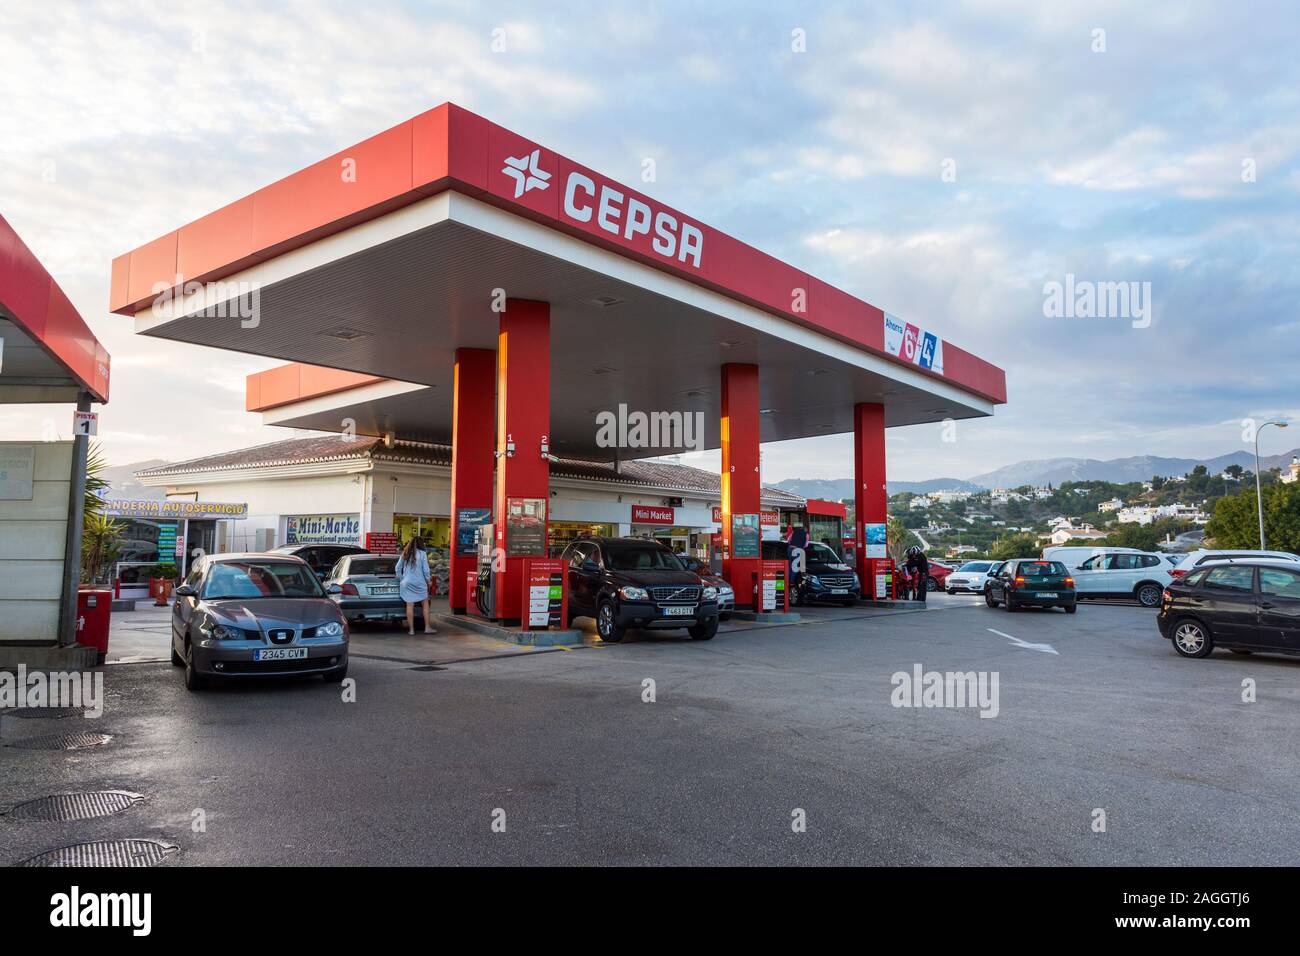 Nerja, Andalusia, Spain. Cepsa petrol or gas station. People fueling their cars. Stock Photo